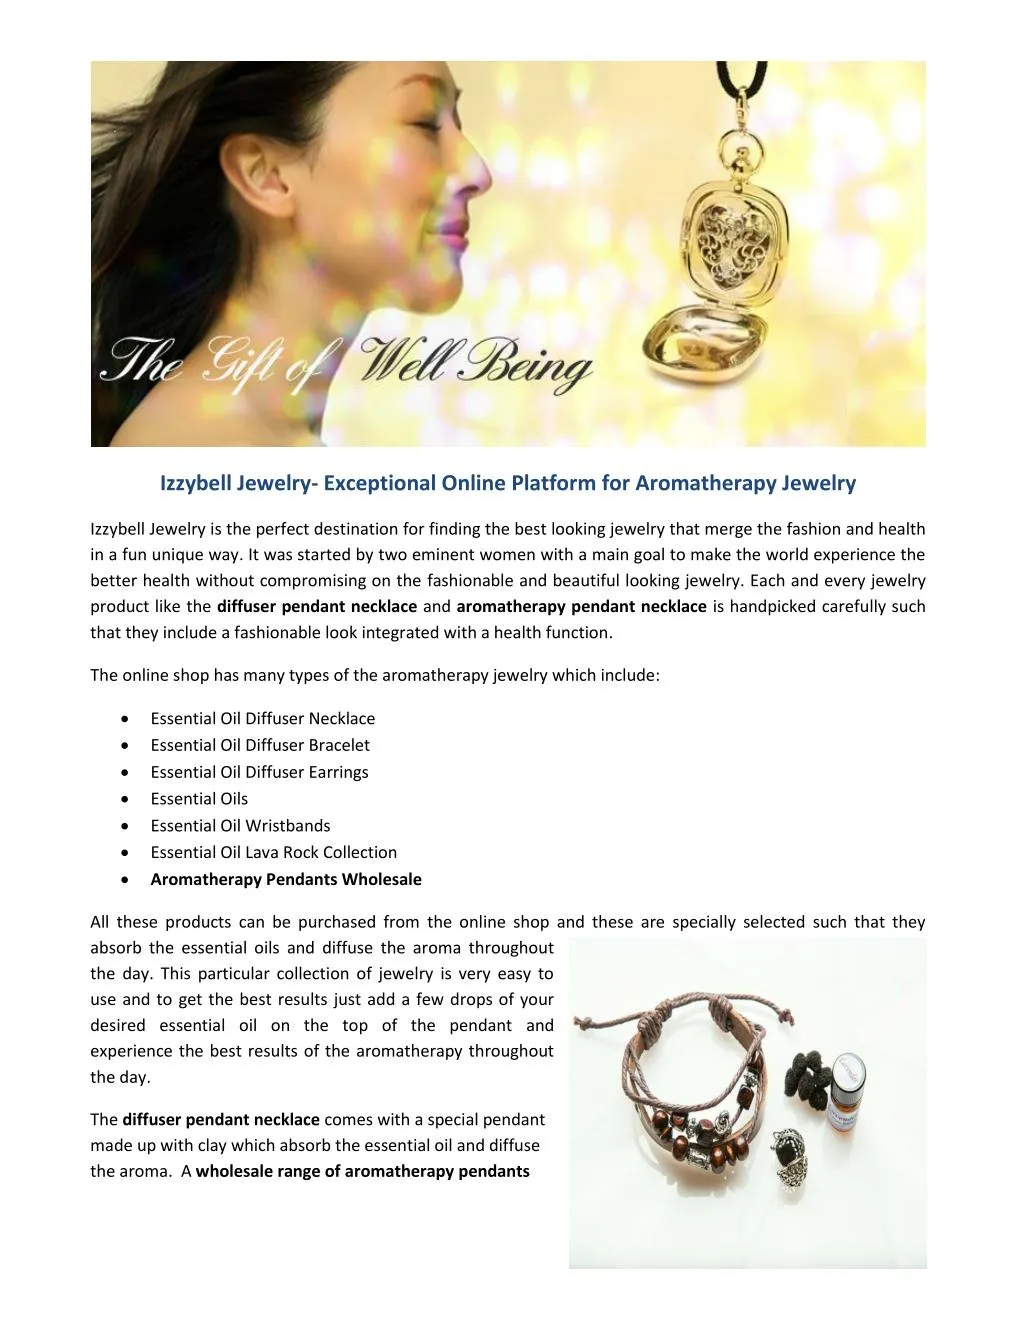 izzybell jewelry exceptional online platform n.